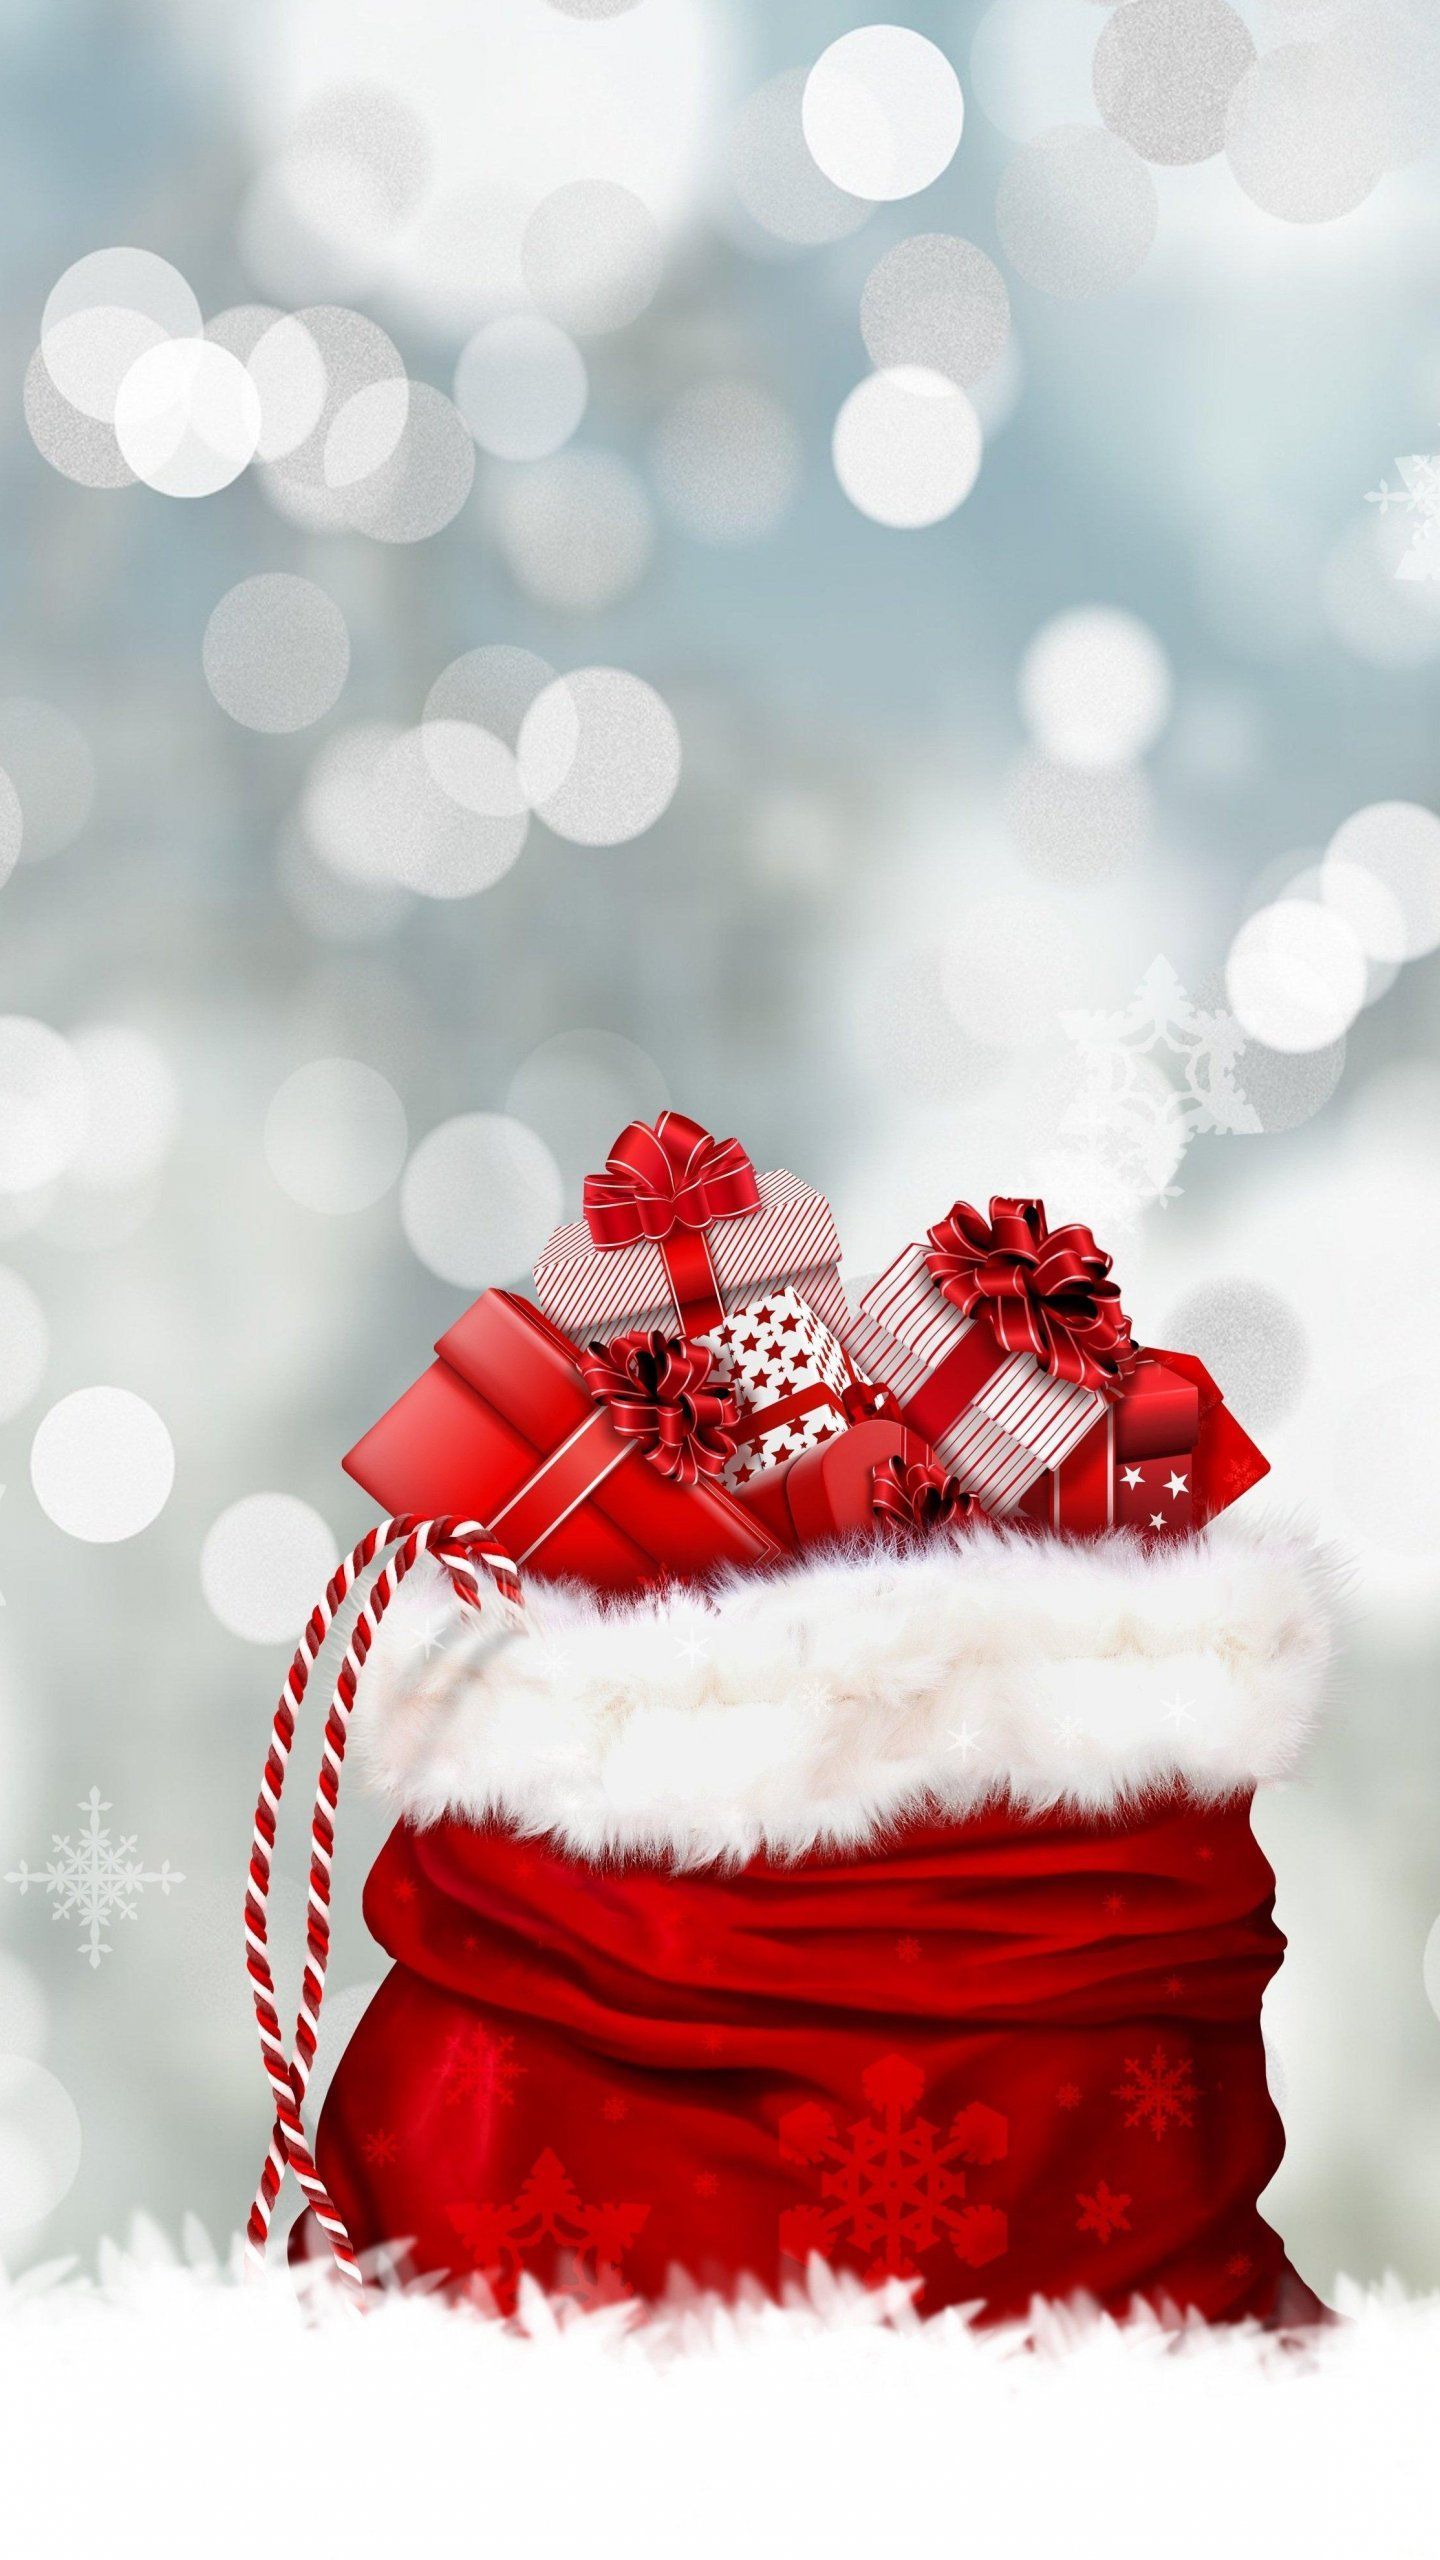 Christmas Gifts from Santa Wallpaper, Android & Desktop Background